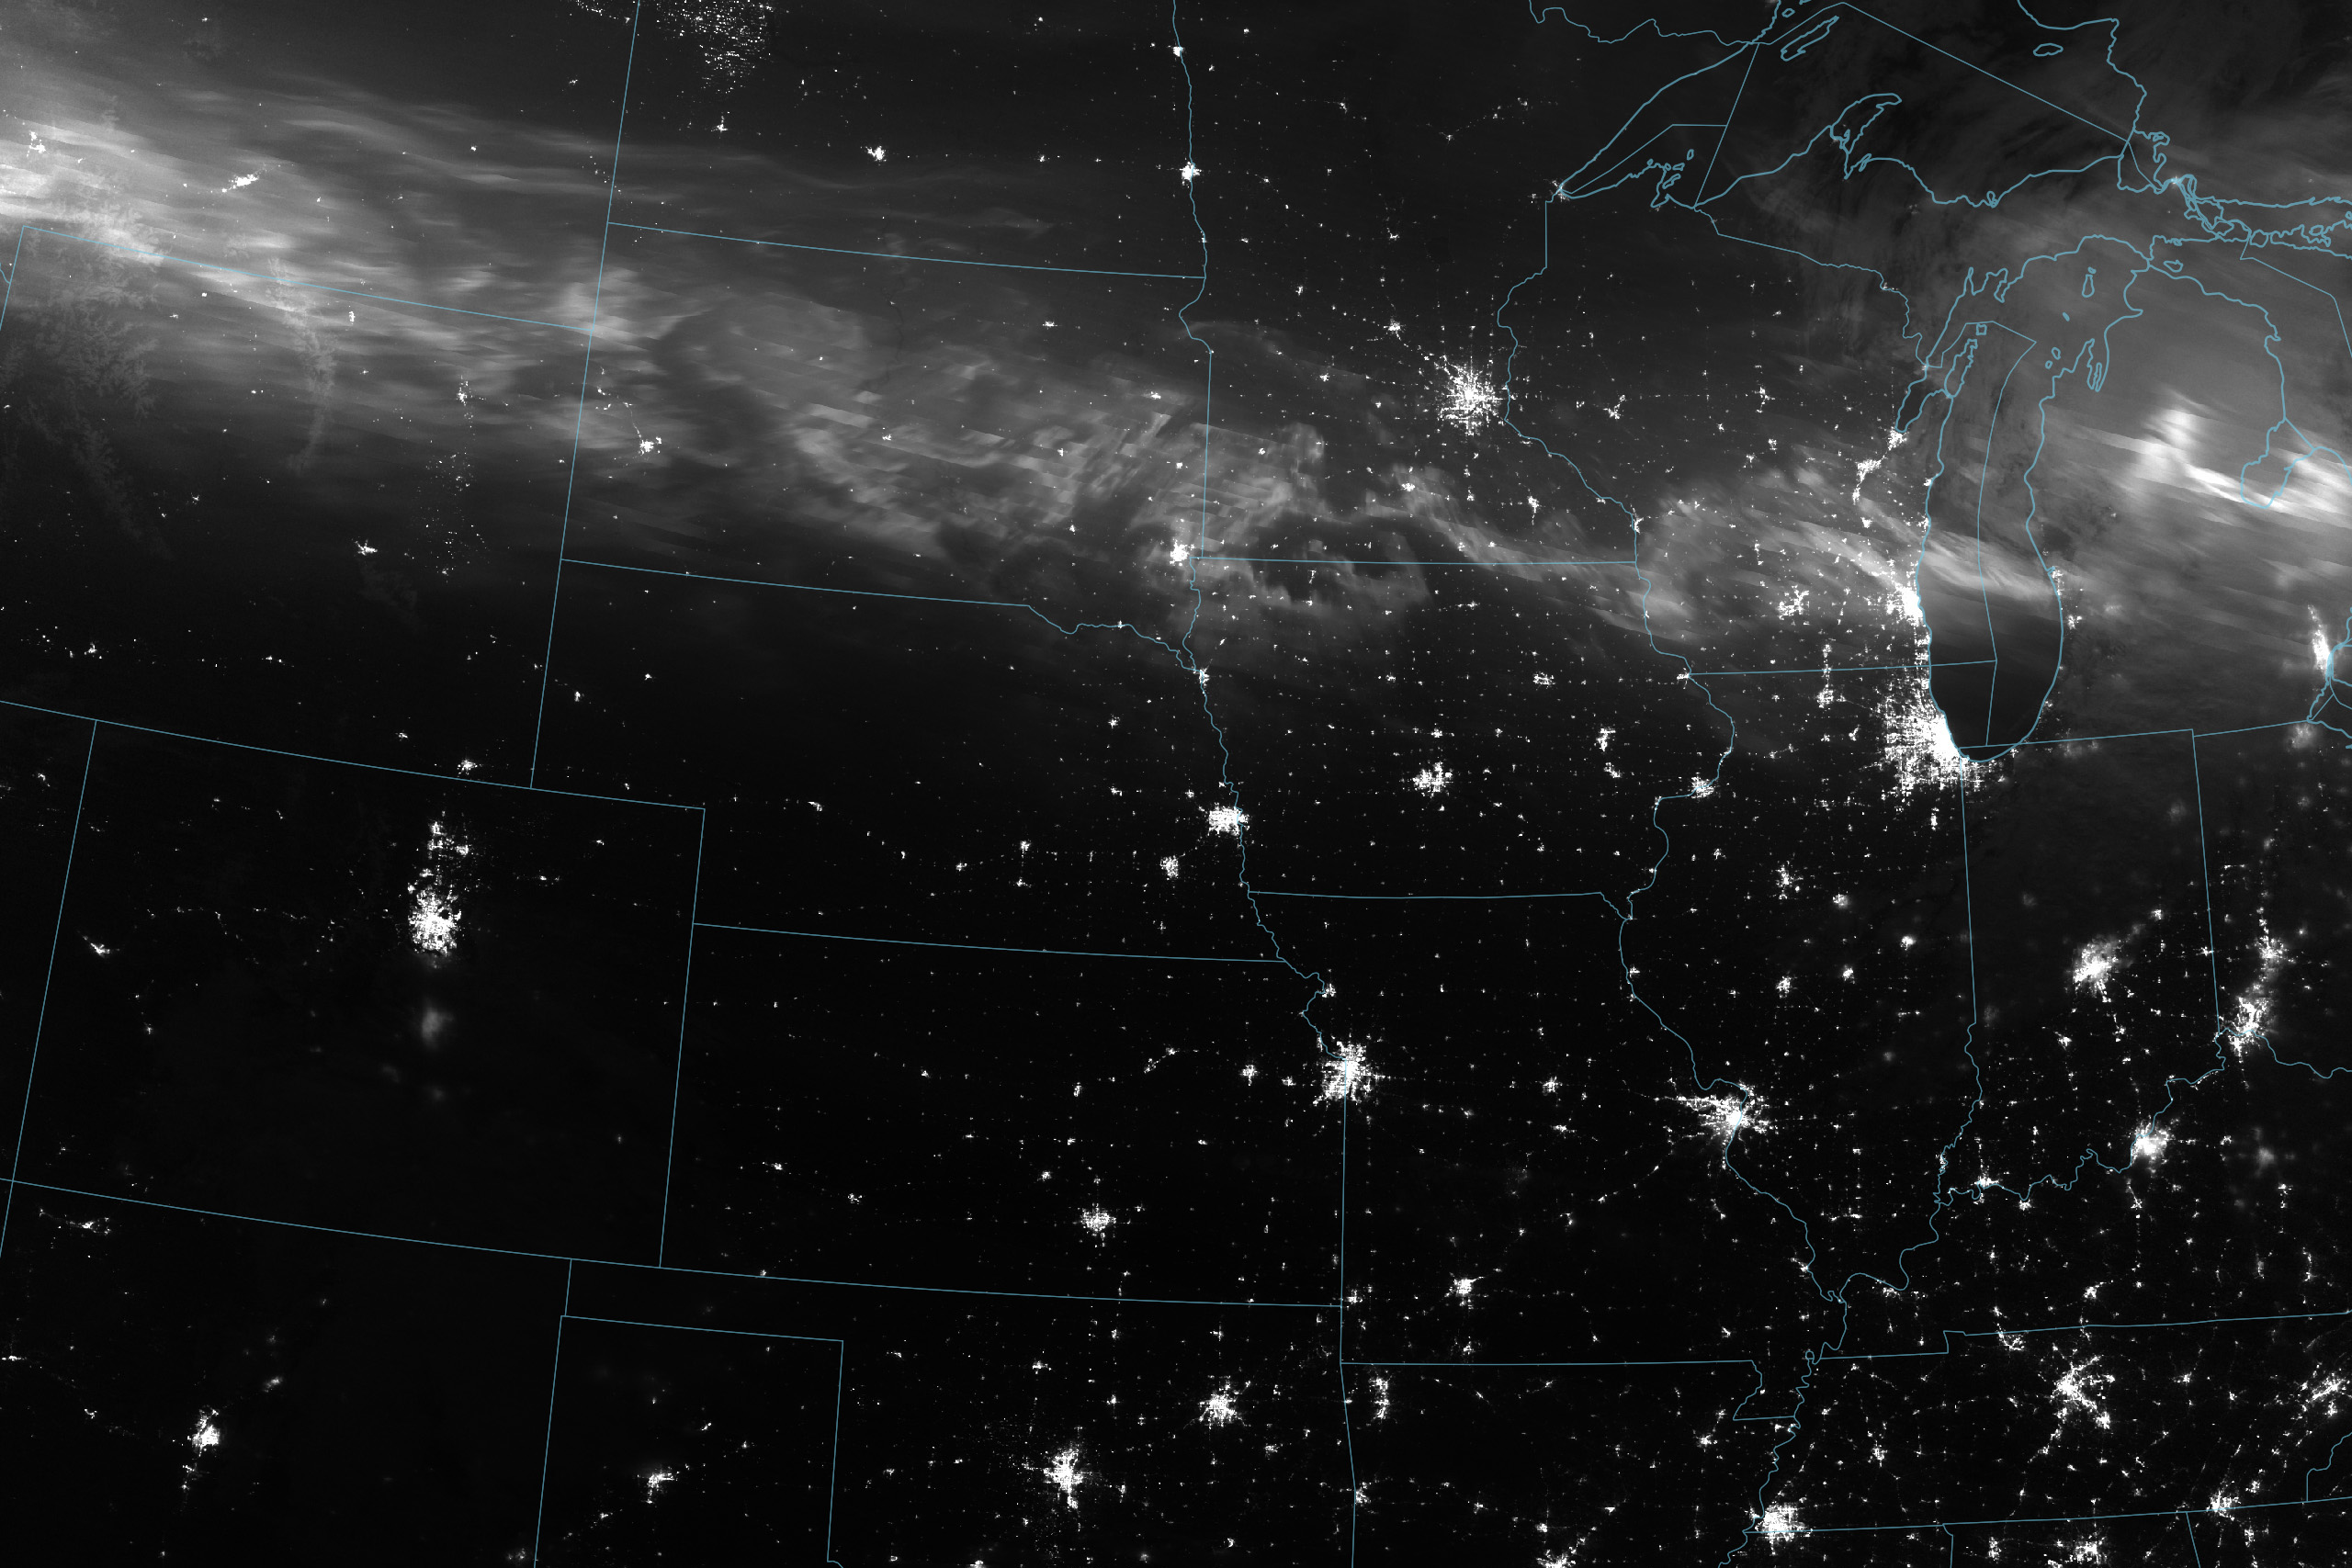 A nighttime satellite view of the United states, with state boundary overlays, centering the Iowa-Nebraska-Missourri border. The illumination of major city lights can be seen, most prominently Chicago in the upper middle right of the image. Just North of that you can see the densest part of a white haze that constitutes the Aurora can be seen. It spans the width of the image and is brightest on the far left over Montana. The belt of light curves steadily over the more northern US states with swirls of higher density.